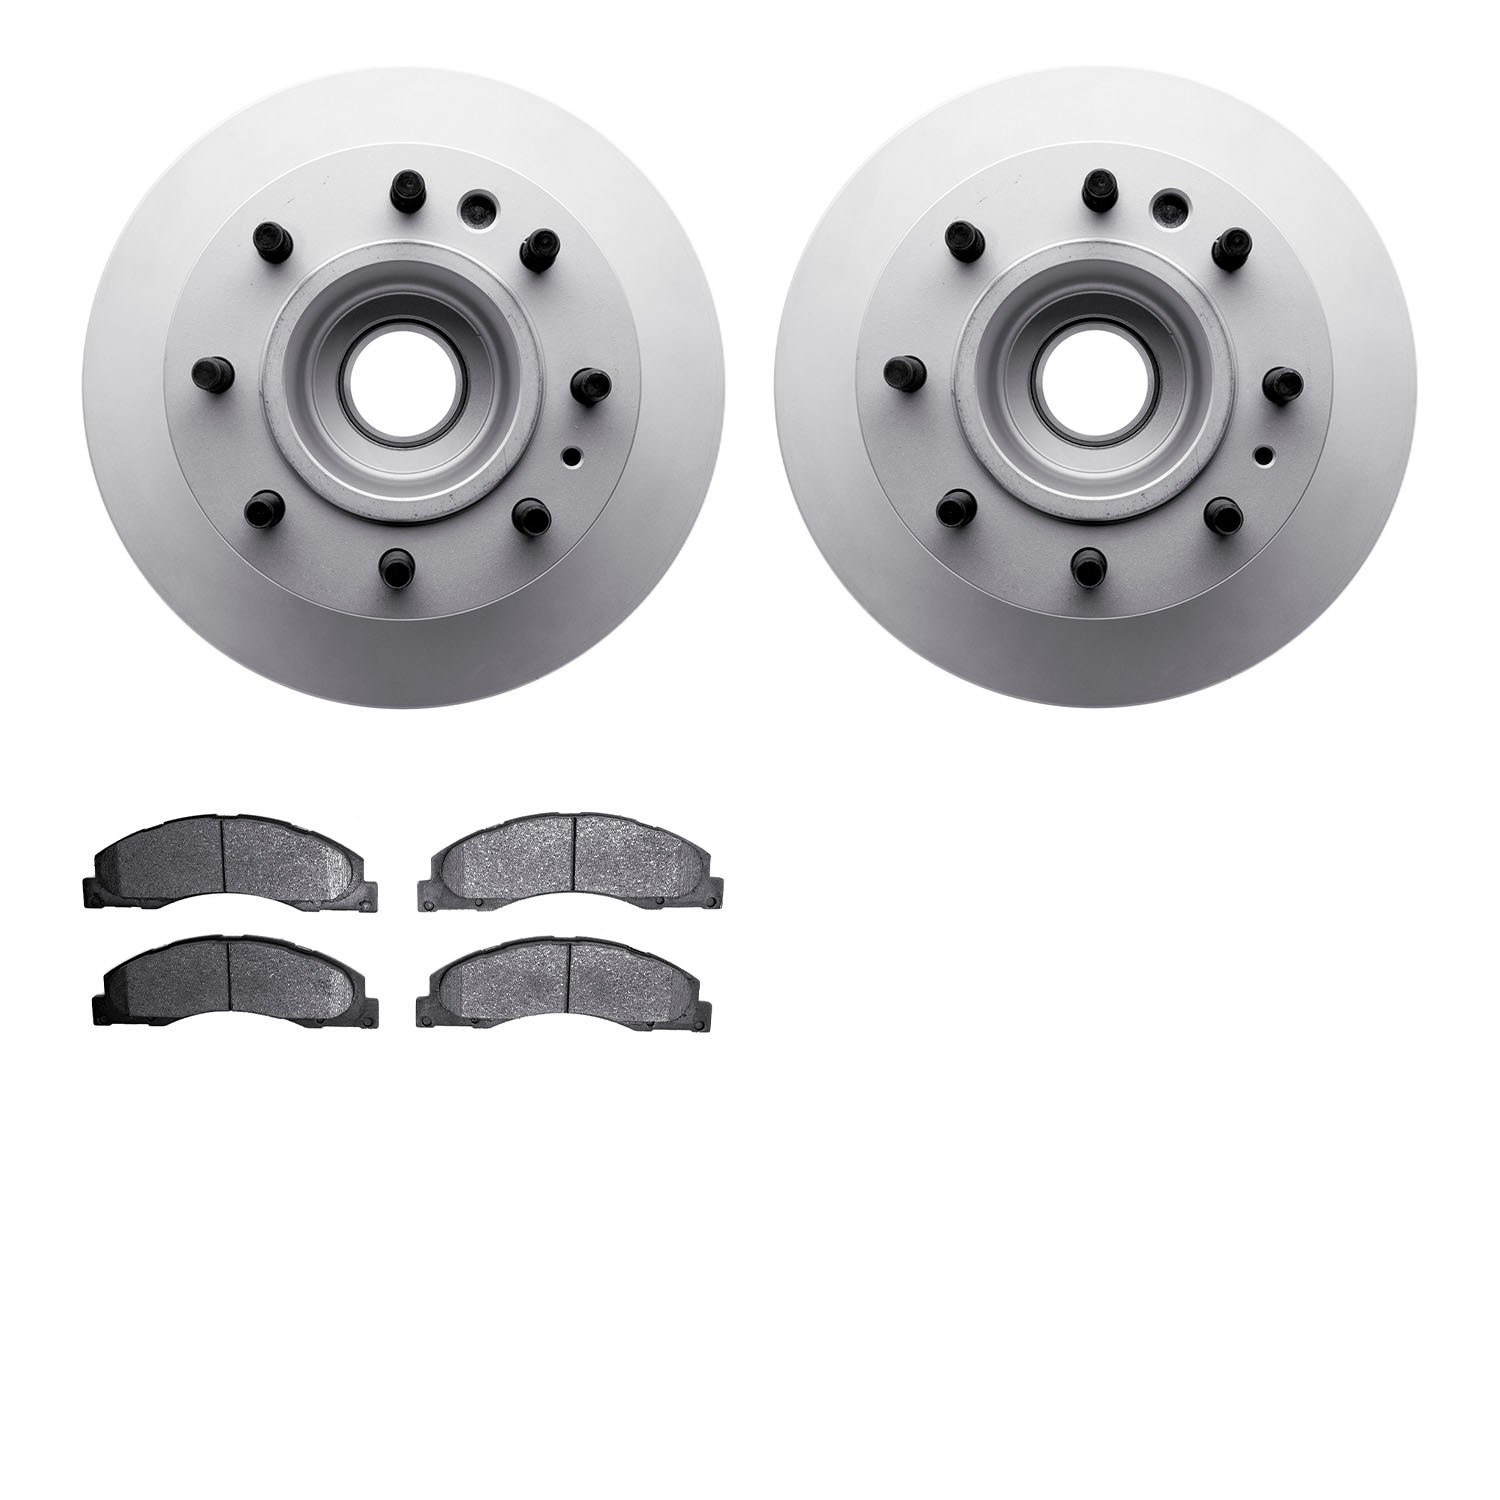 4202-99180 Geospec Brake Rotors w/Heavy-Duty Brake Pads Kit, Fits Select Ford/Lincoln/Mercury/Mazda, Position: Front